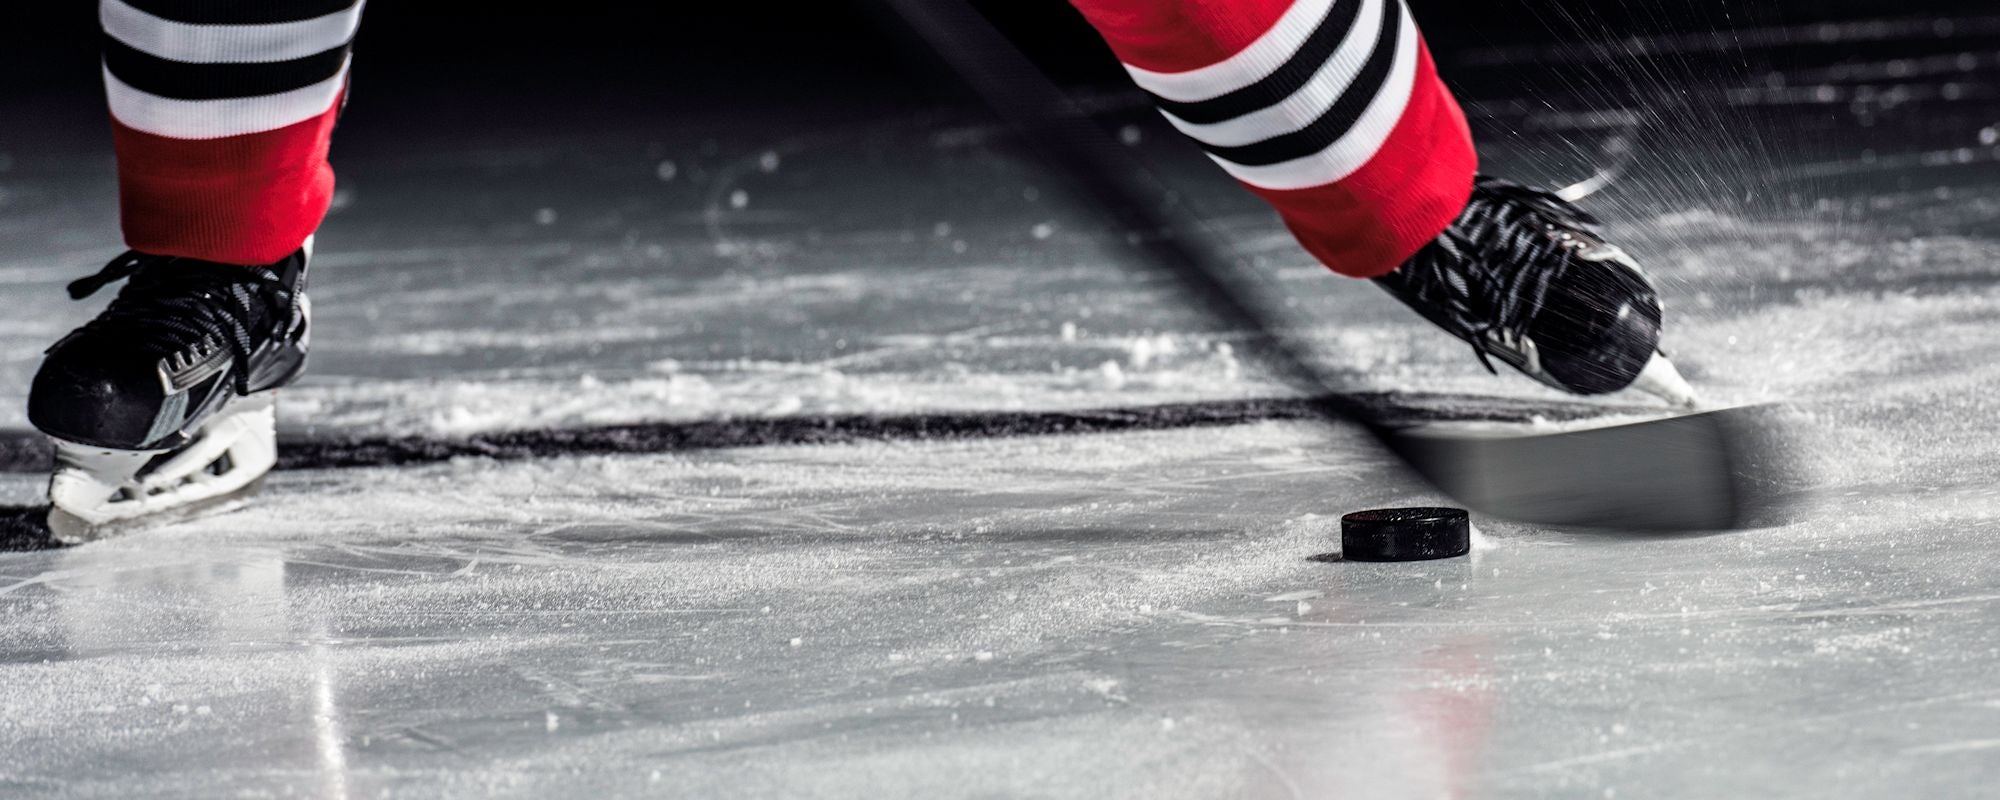 Detail of hockey player on ice with stick and puck